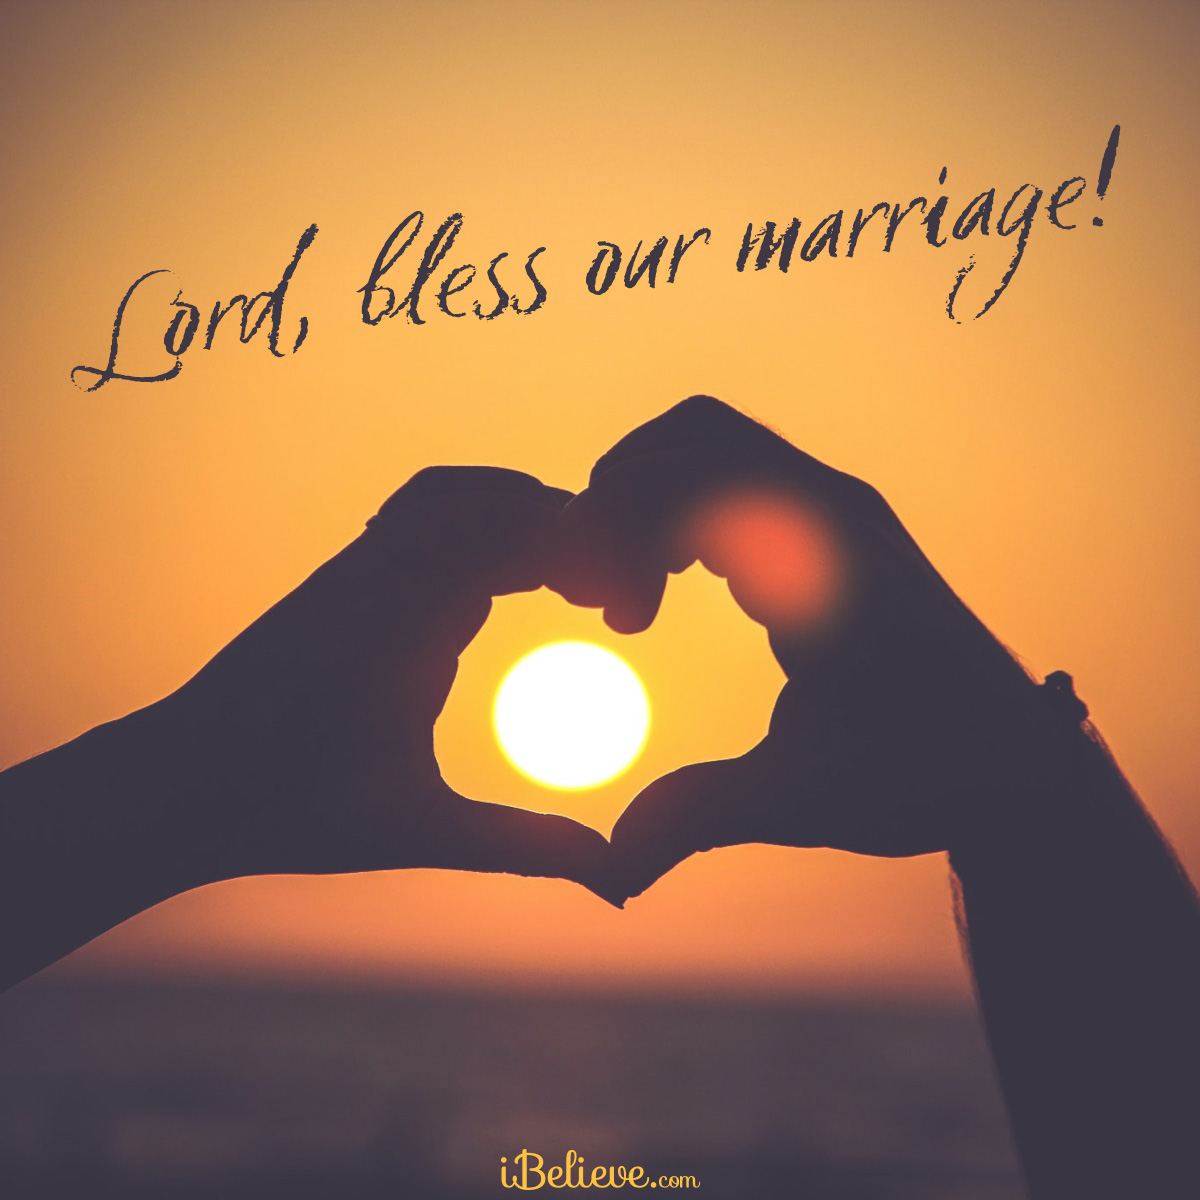 Inspirational image that says, Lord, bless our marriage